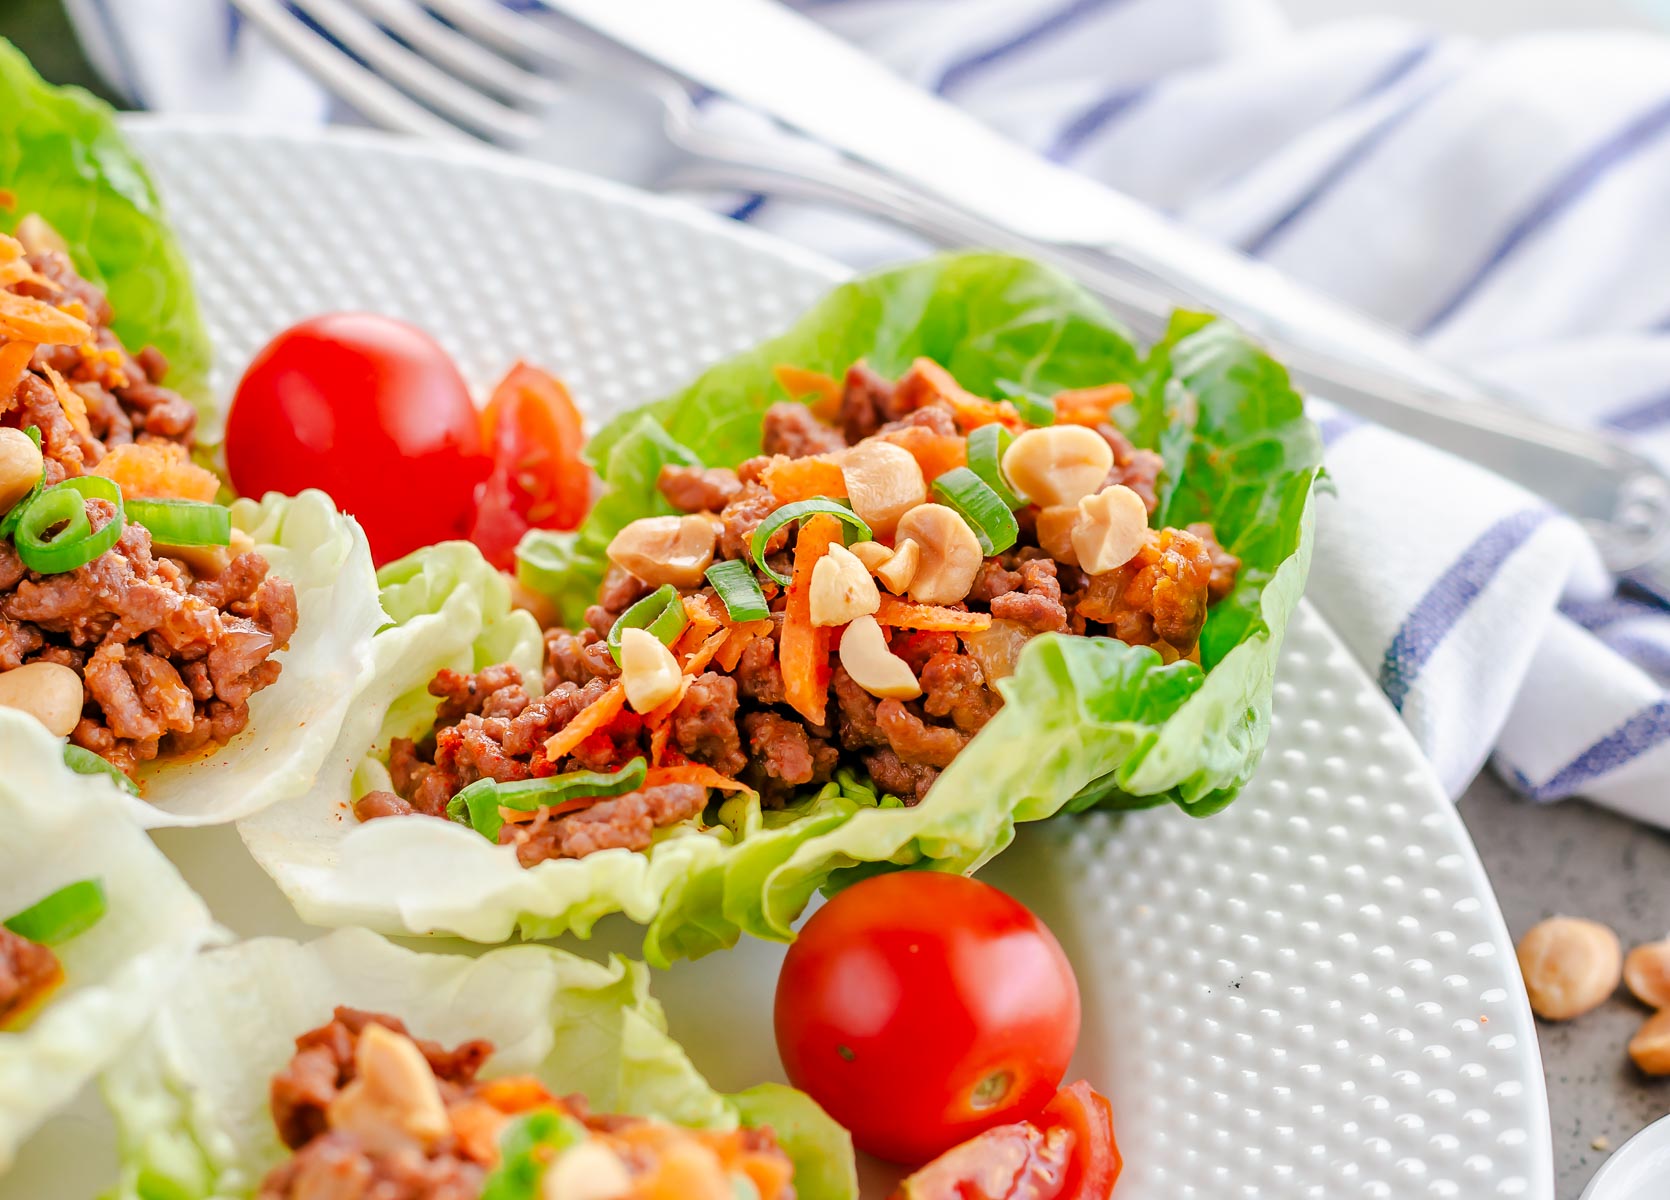 Close up image of a lettuce wrap topped with carrots and peanuts.